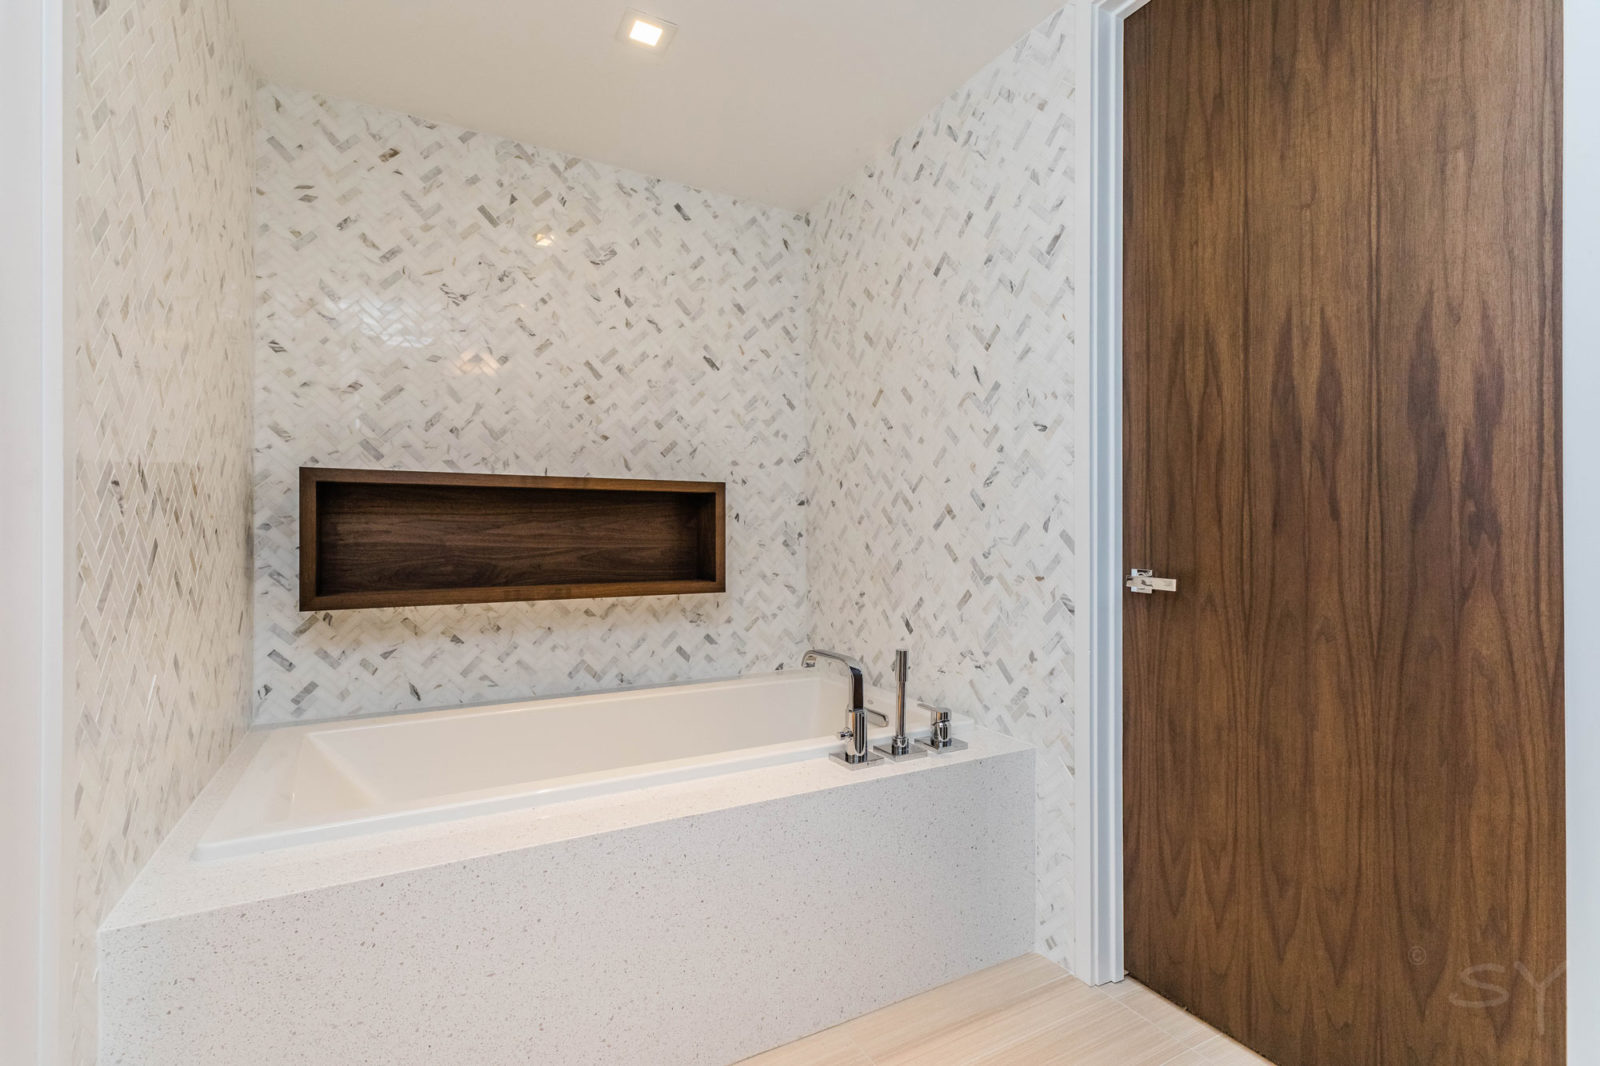 large built in bathtub with light patterned tile walls dark wooden door and chrome finishes